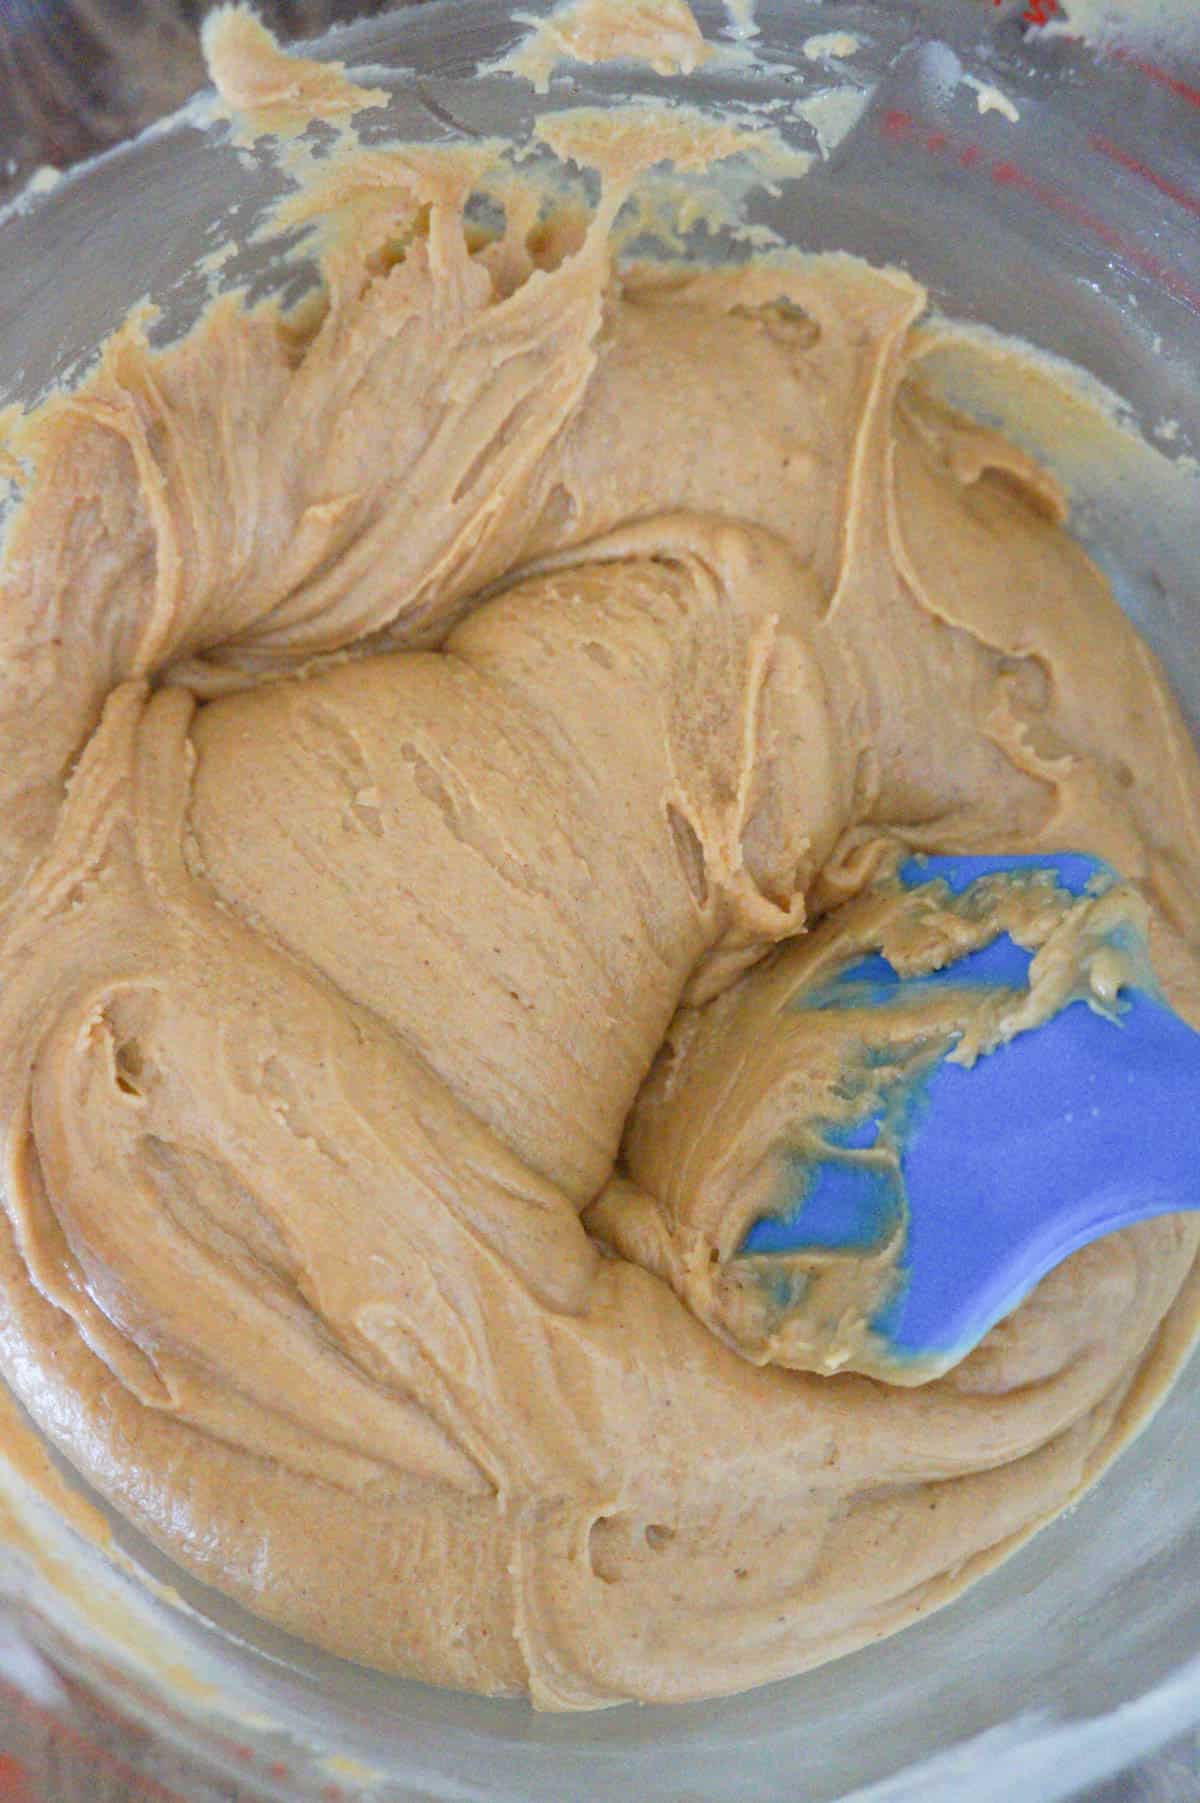 creamy peanut butter mixture in a bowl